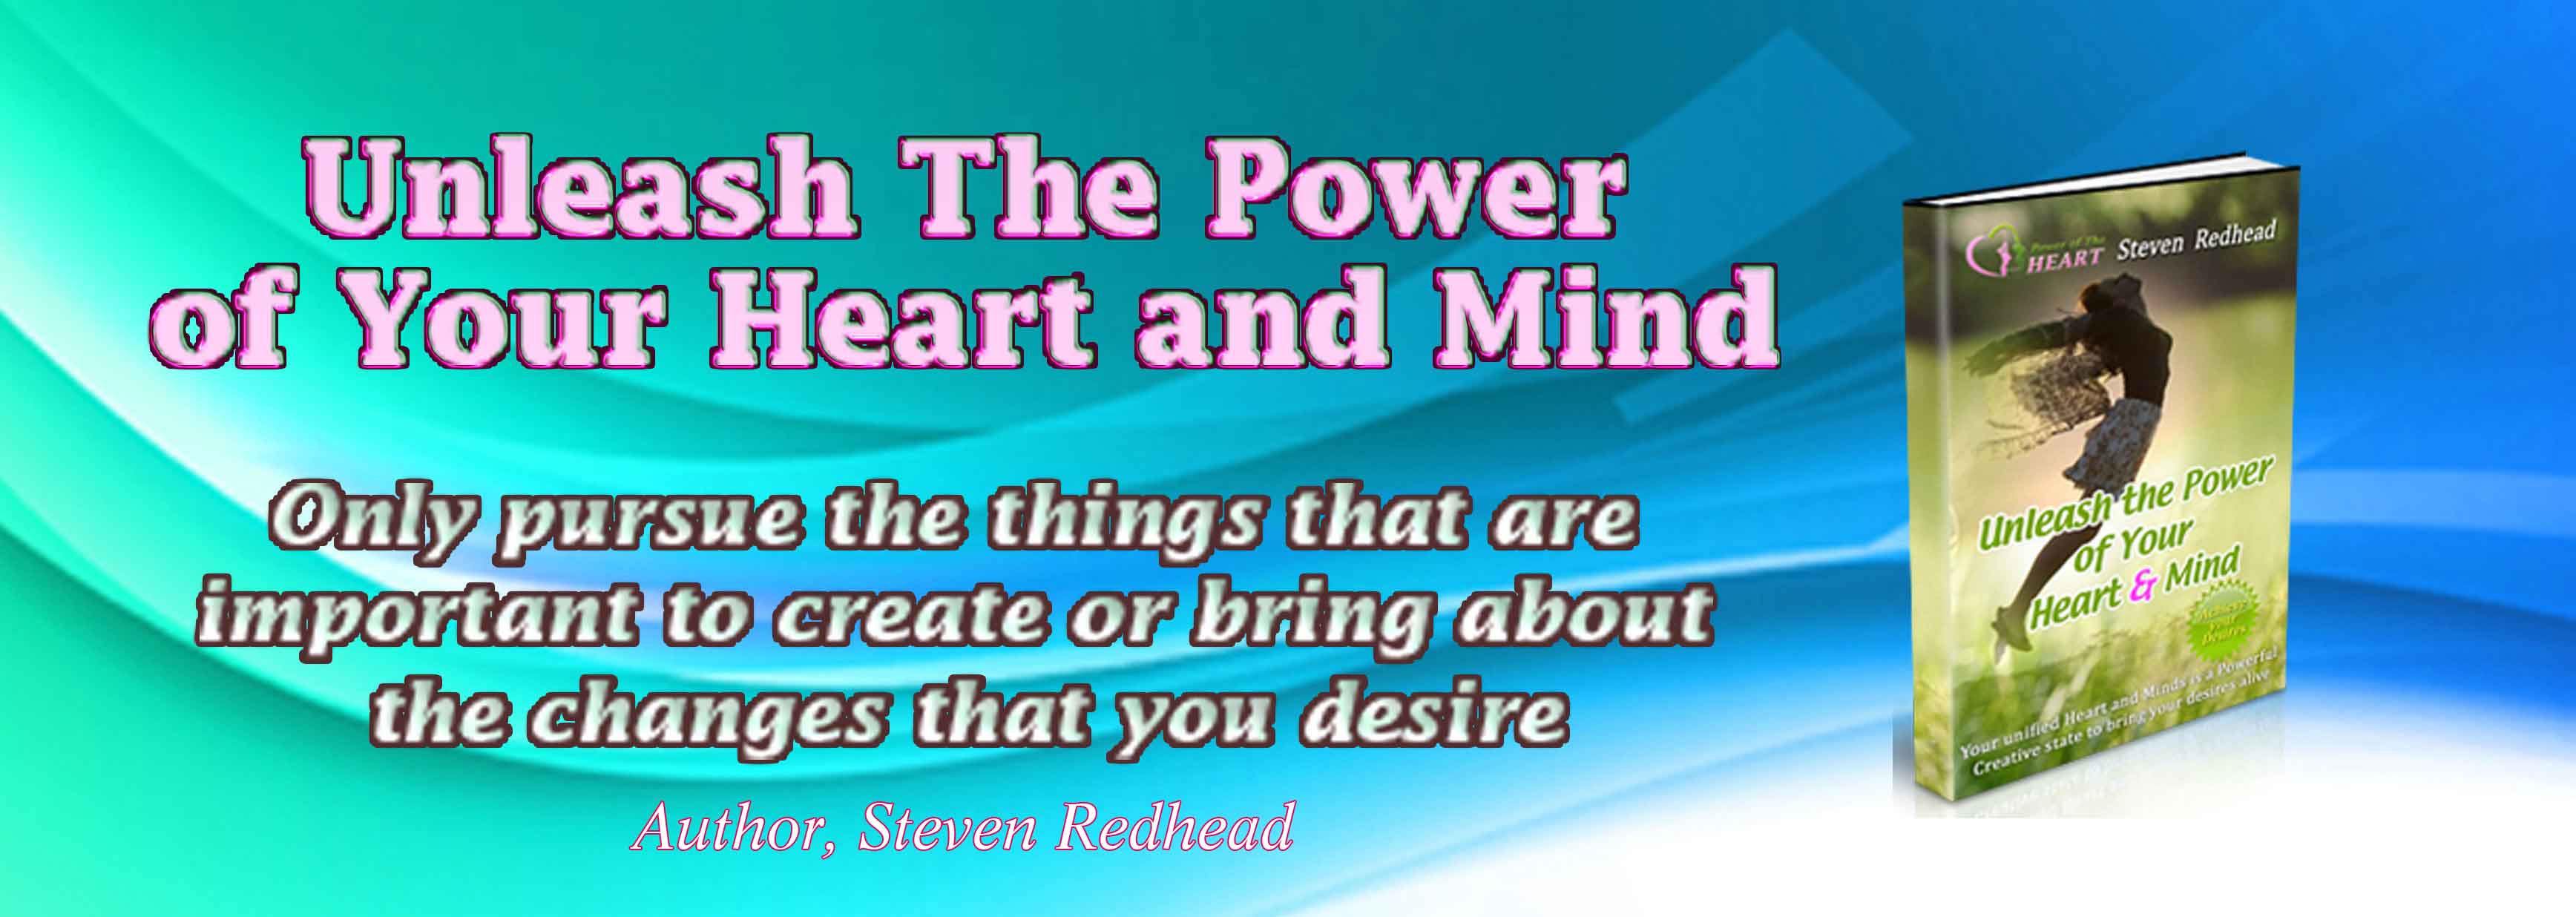 Unleash The Power of Your Heart and Mind book Quote - Desires